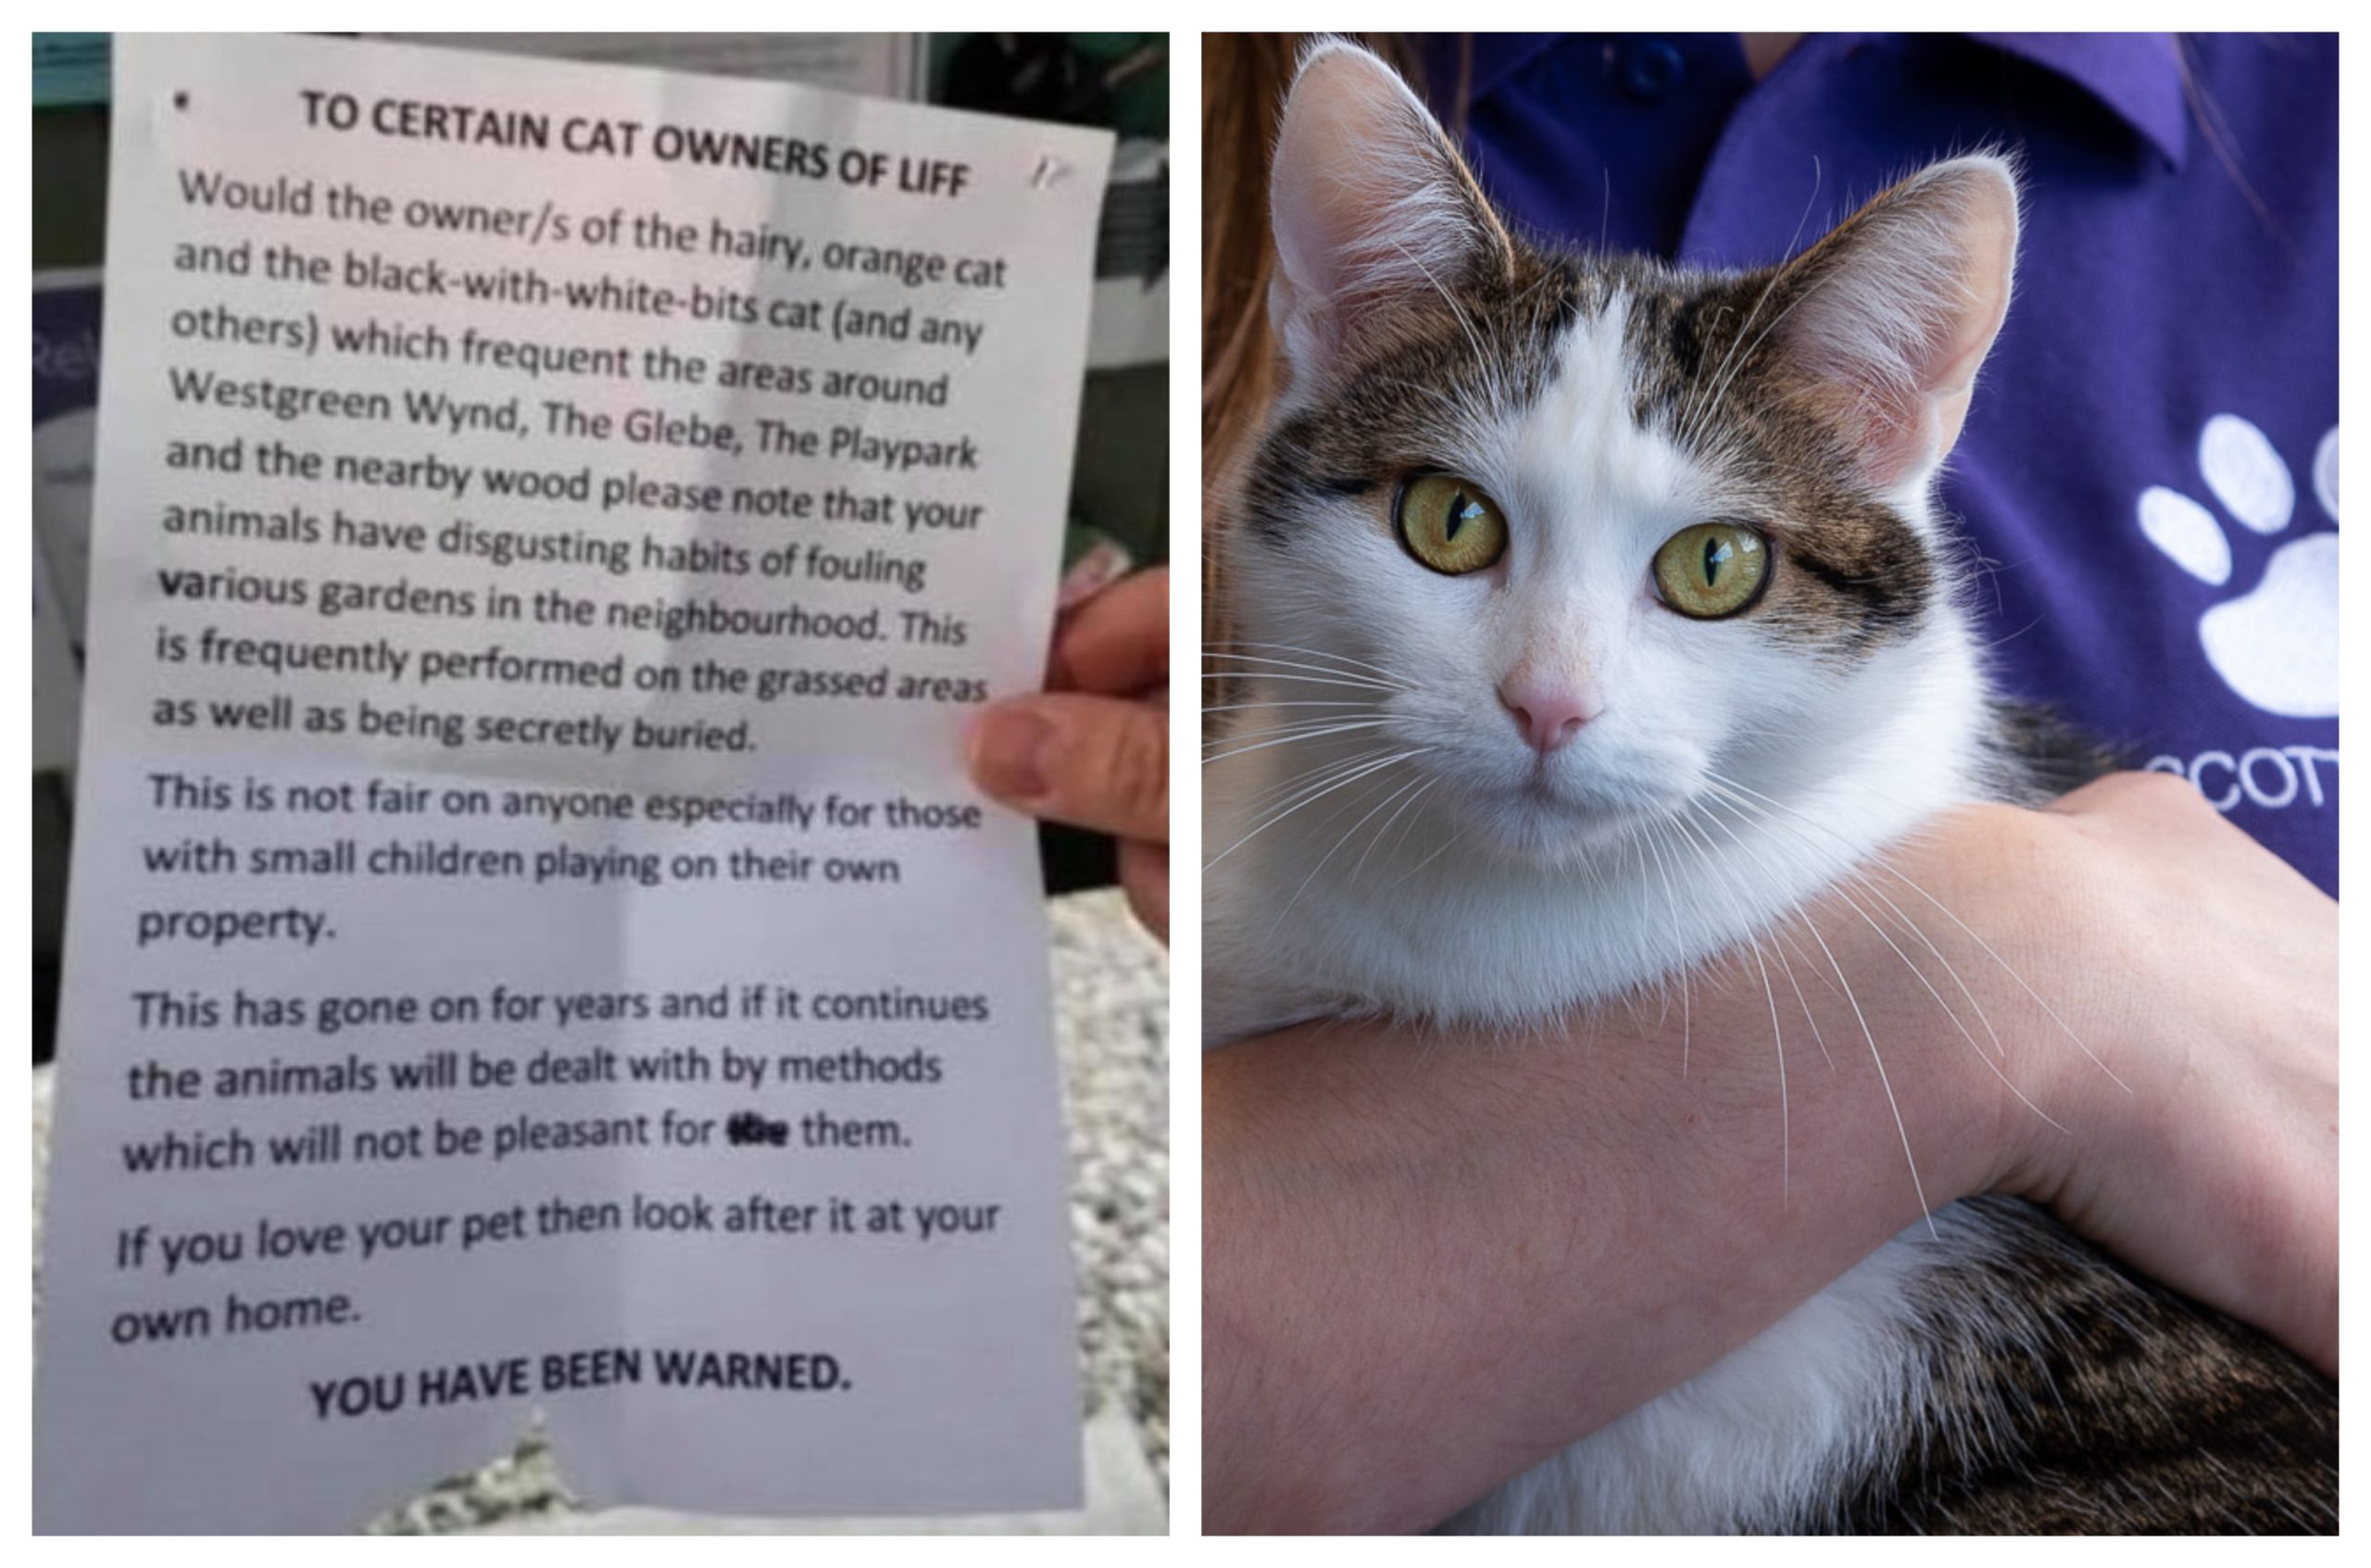 The anonymous letter threatened to harm pet cats